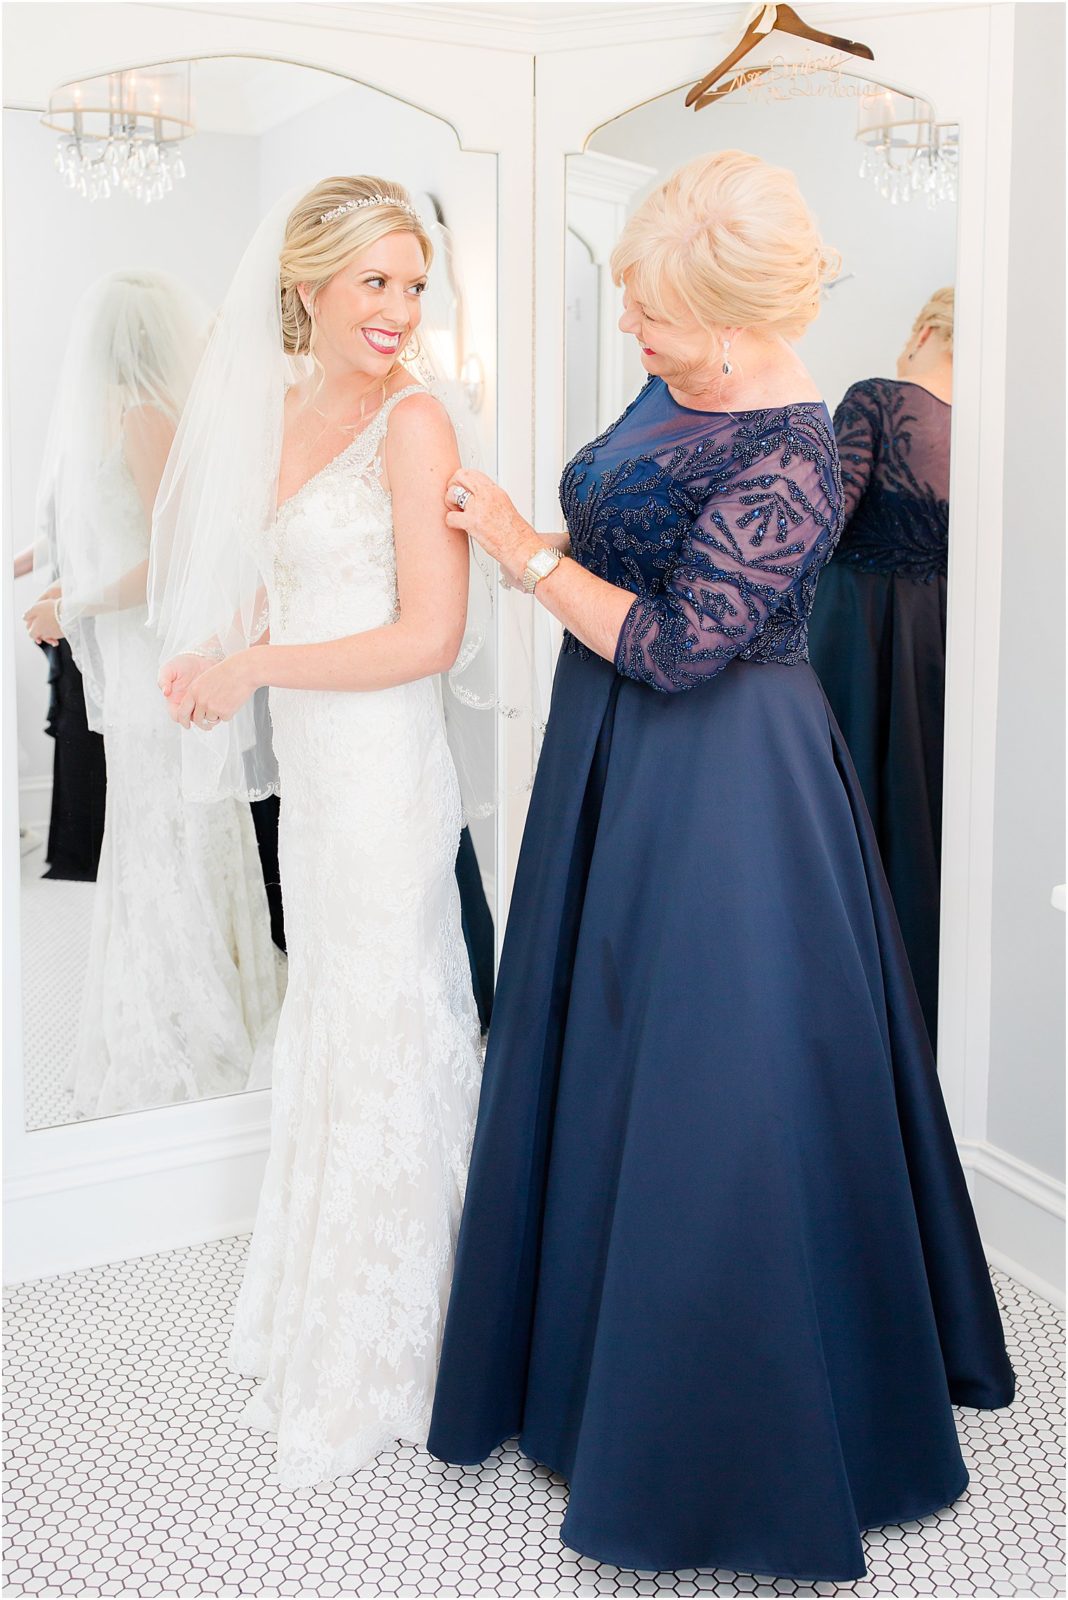 A Guide To Mother Of The Bride Duties Wedding Planning Tips